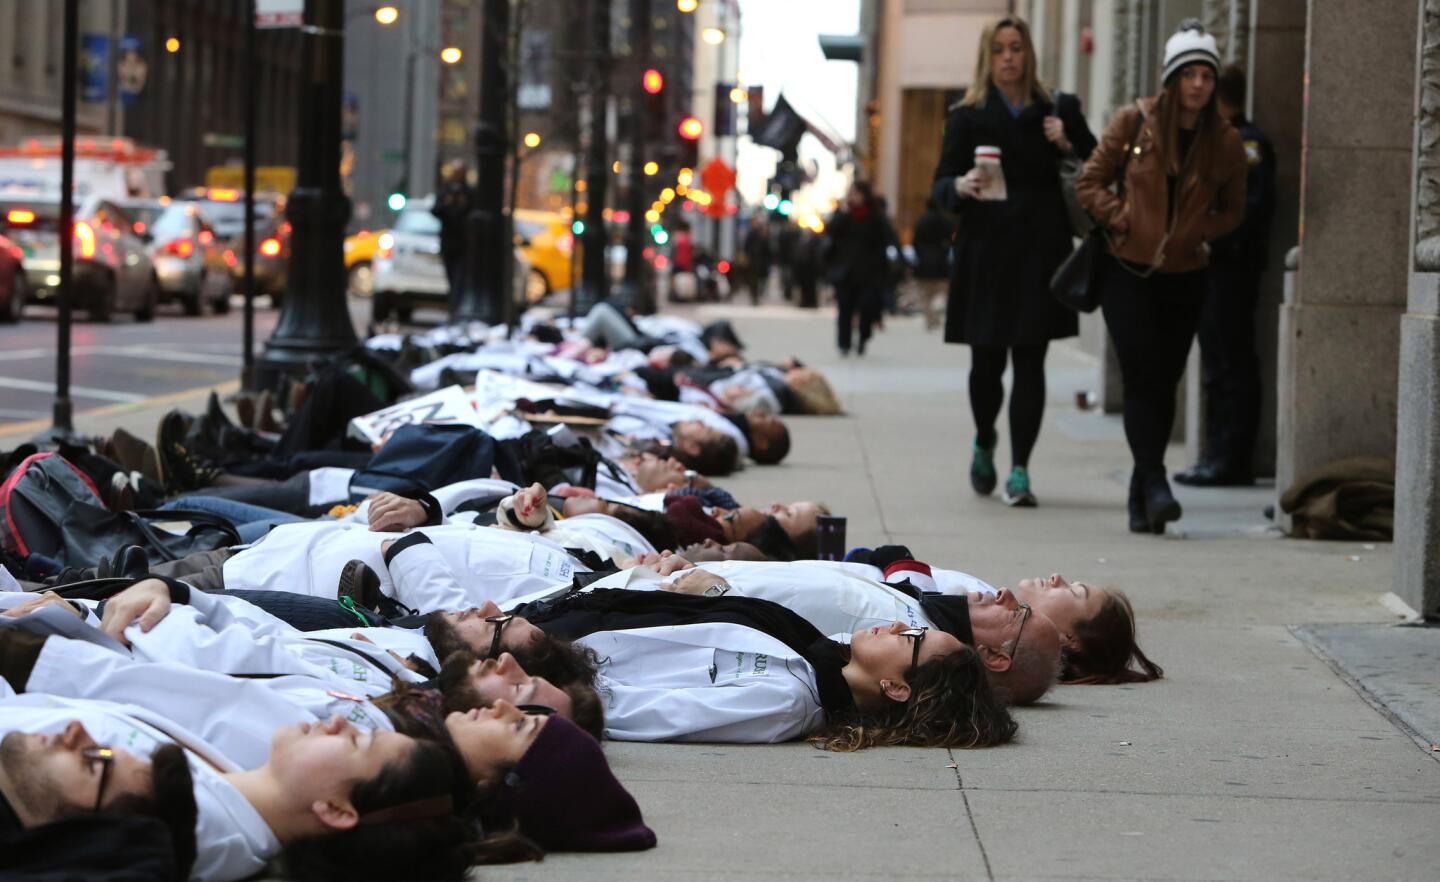 Protesters stage a die-in outside City Hall in the Loop on Dec. 10, 2015. Activists were calling for the resignation of Mayor Rahm Emanuel.